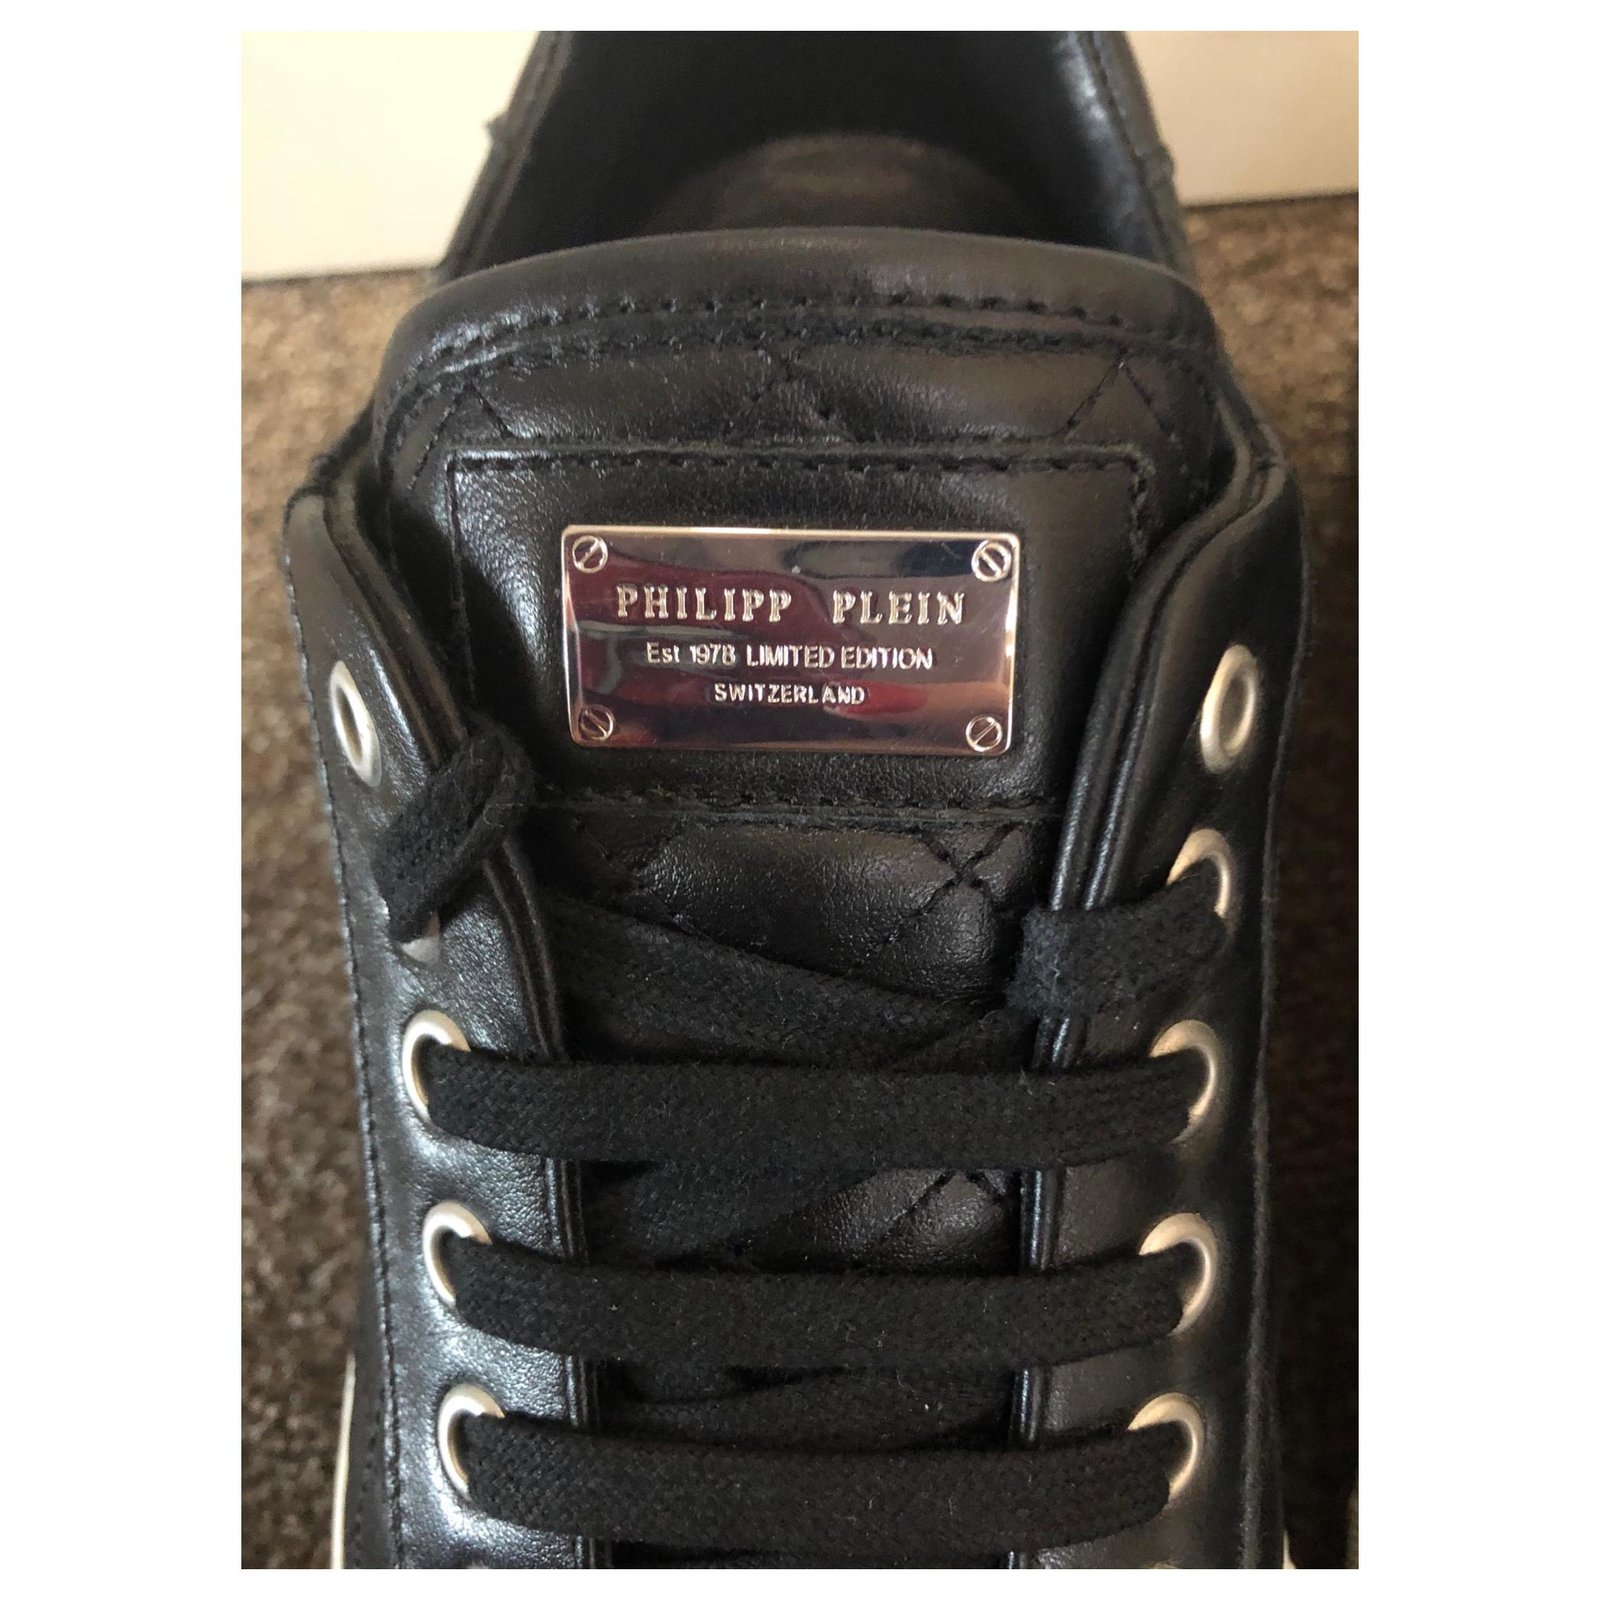 philipp plein limited edition shoes